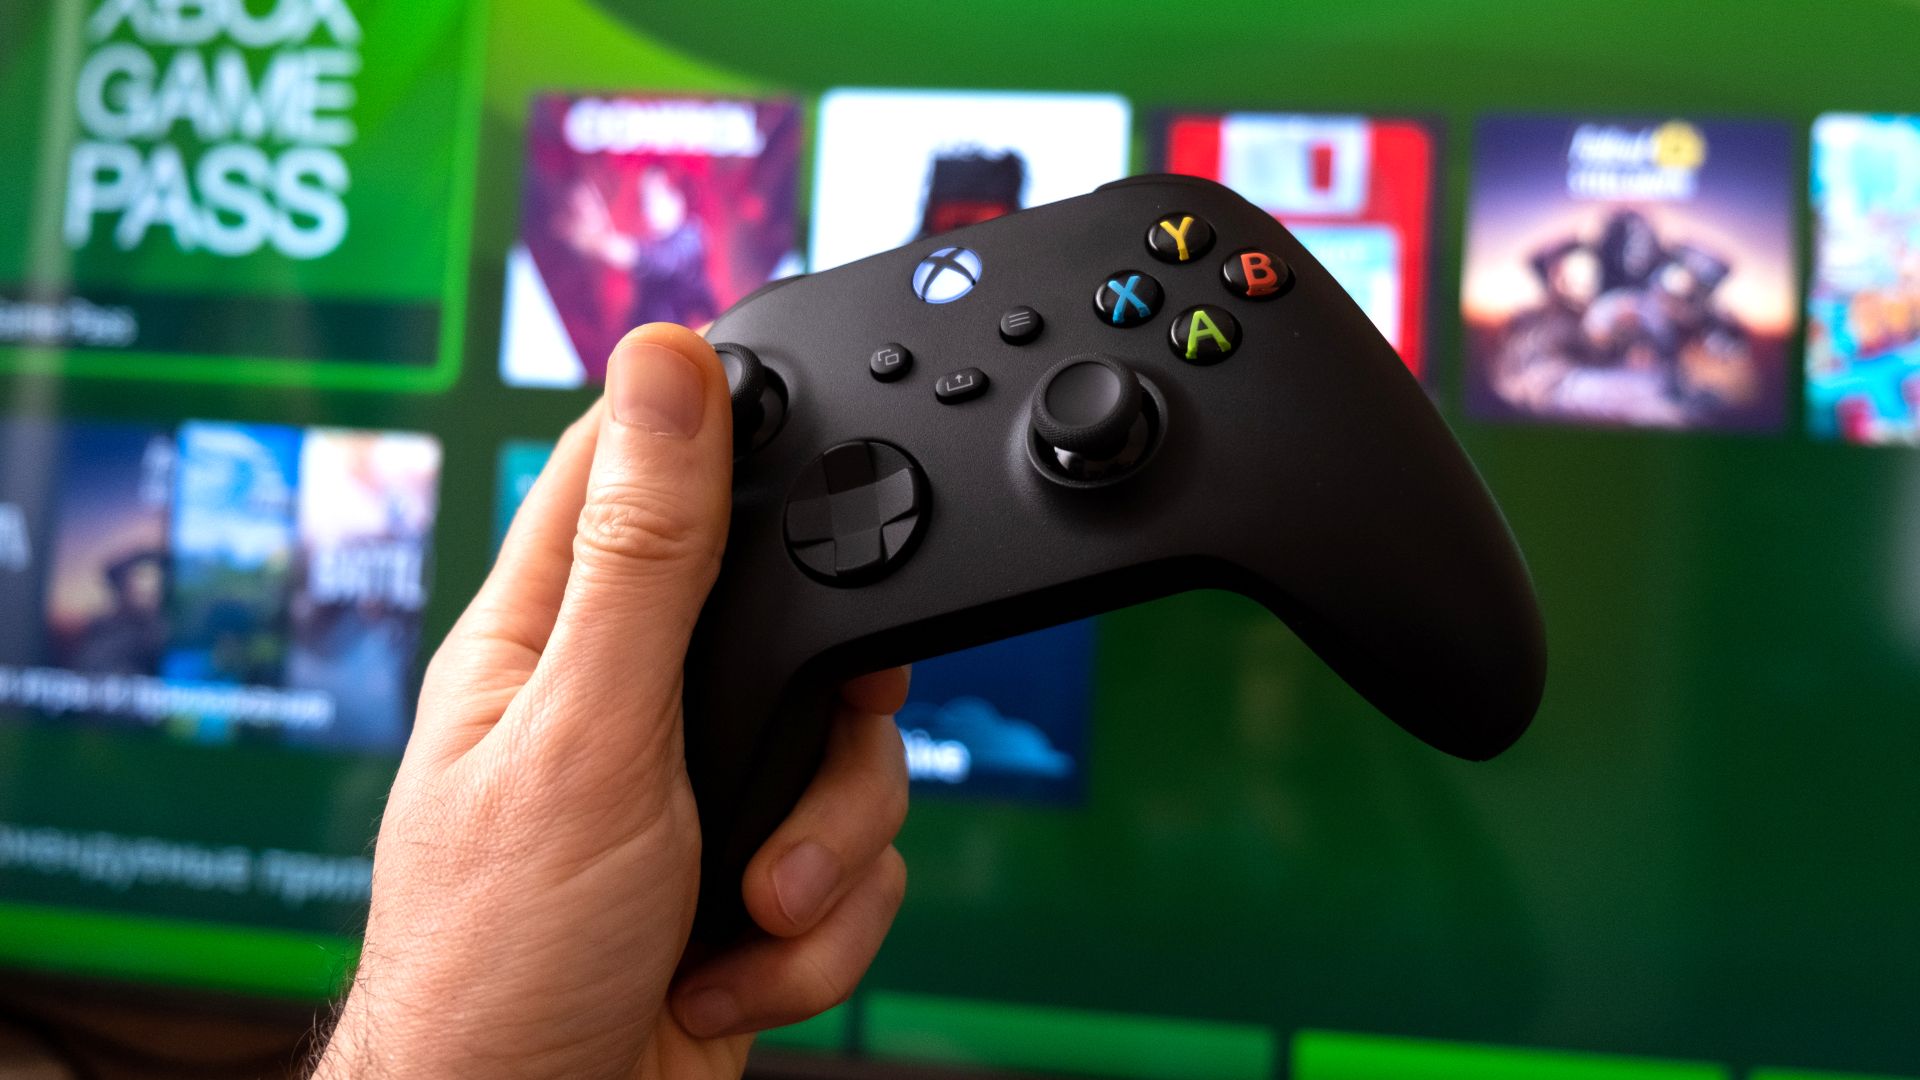 New Xbox 2023 dashboard video: Here's a quick look at Xbox's freshly  polished UI